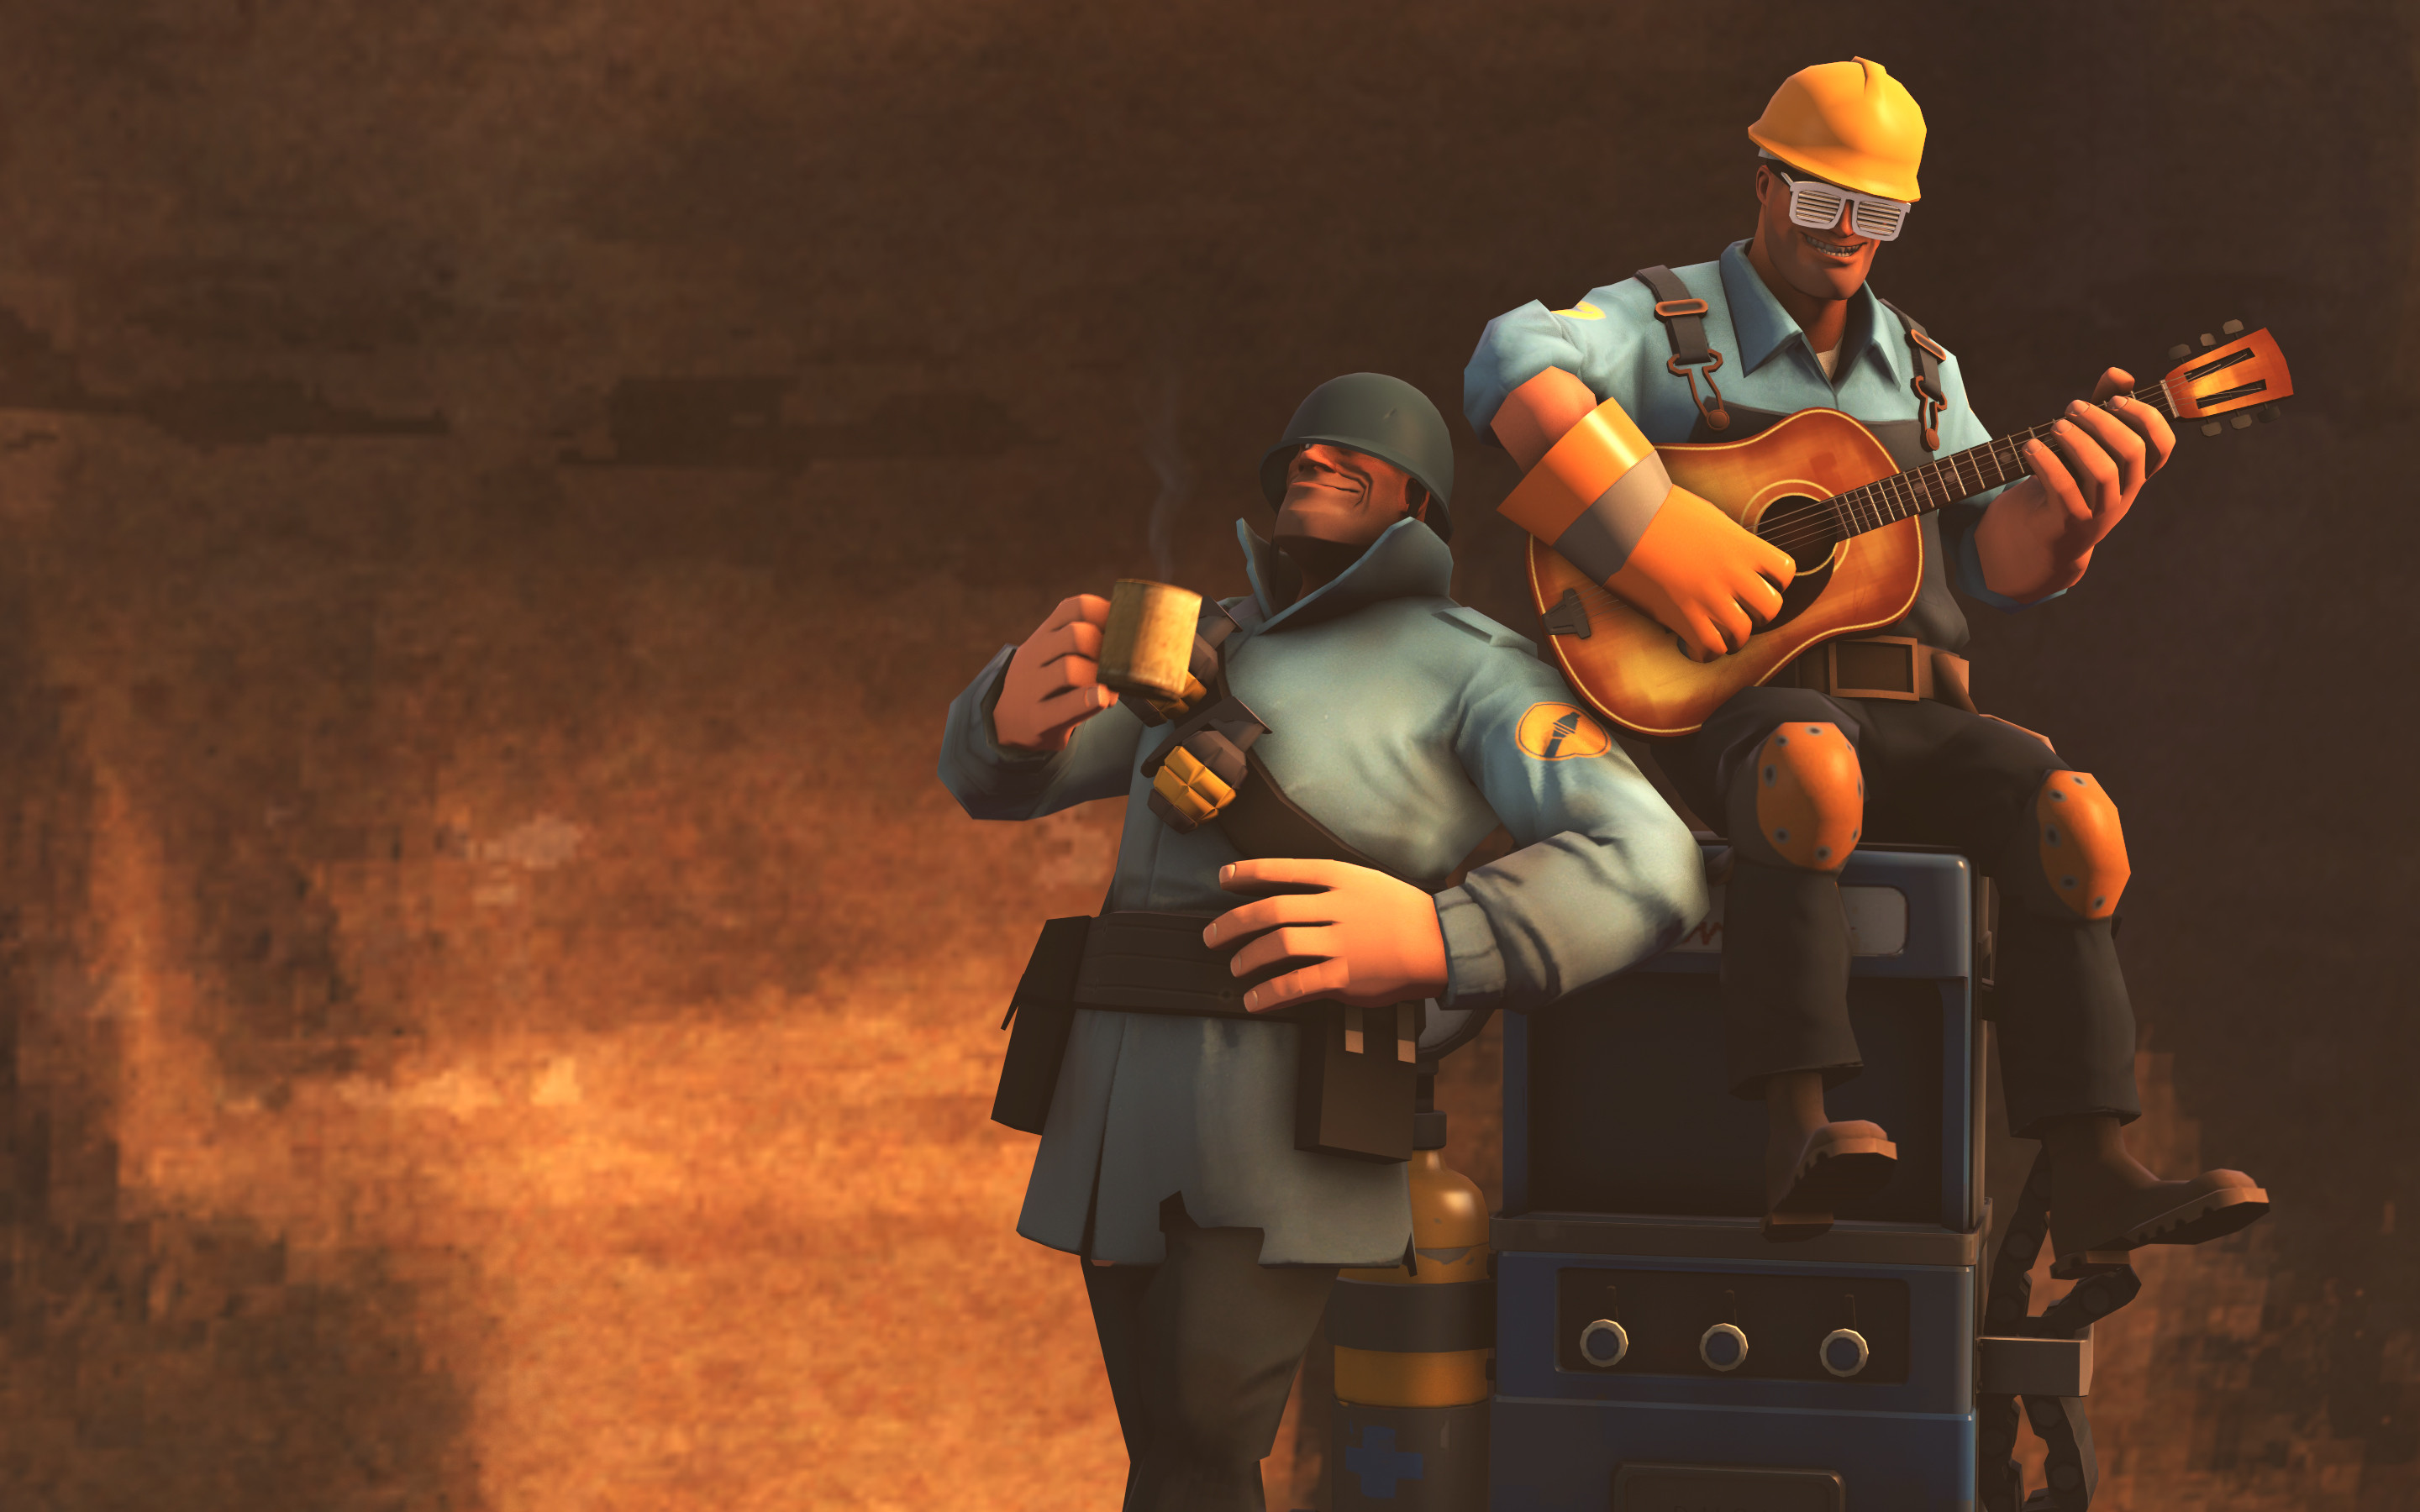 2880x1800 Team fortress 2 wallpaper soldier and engie chill wallpapers.